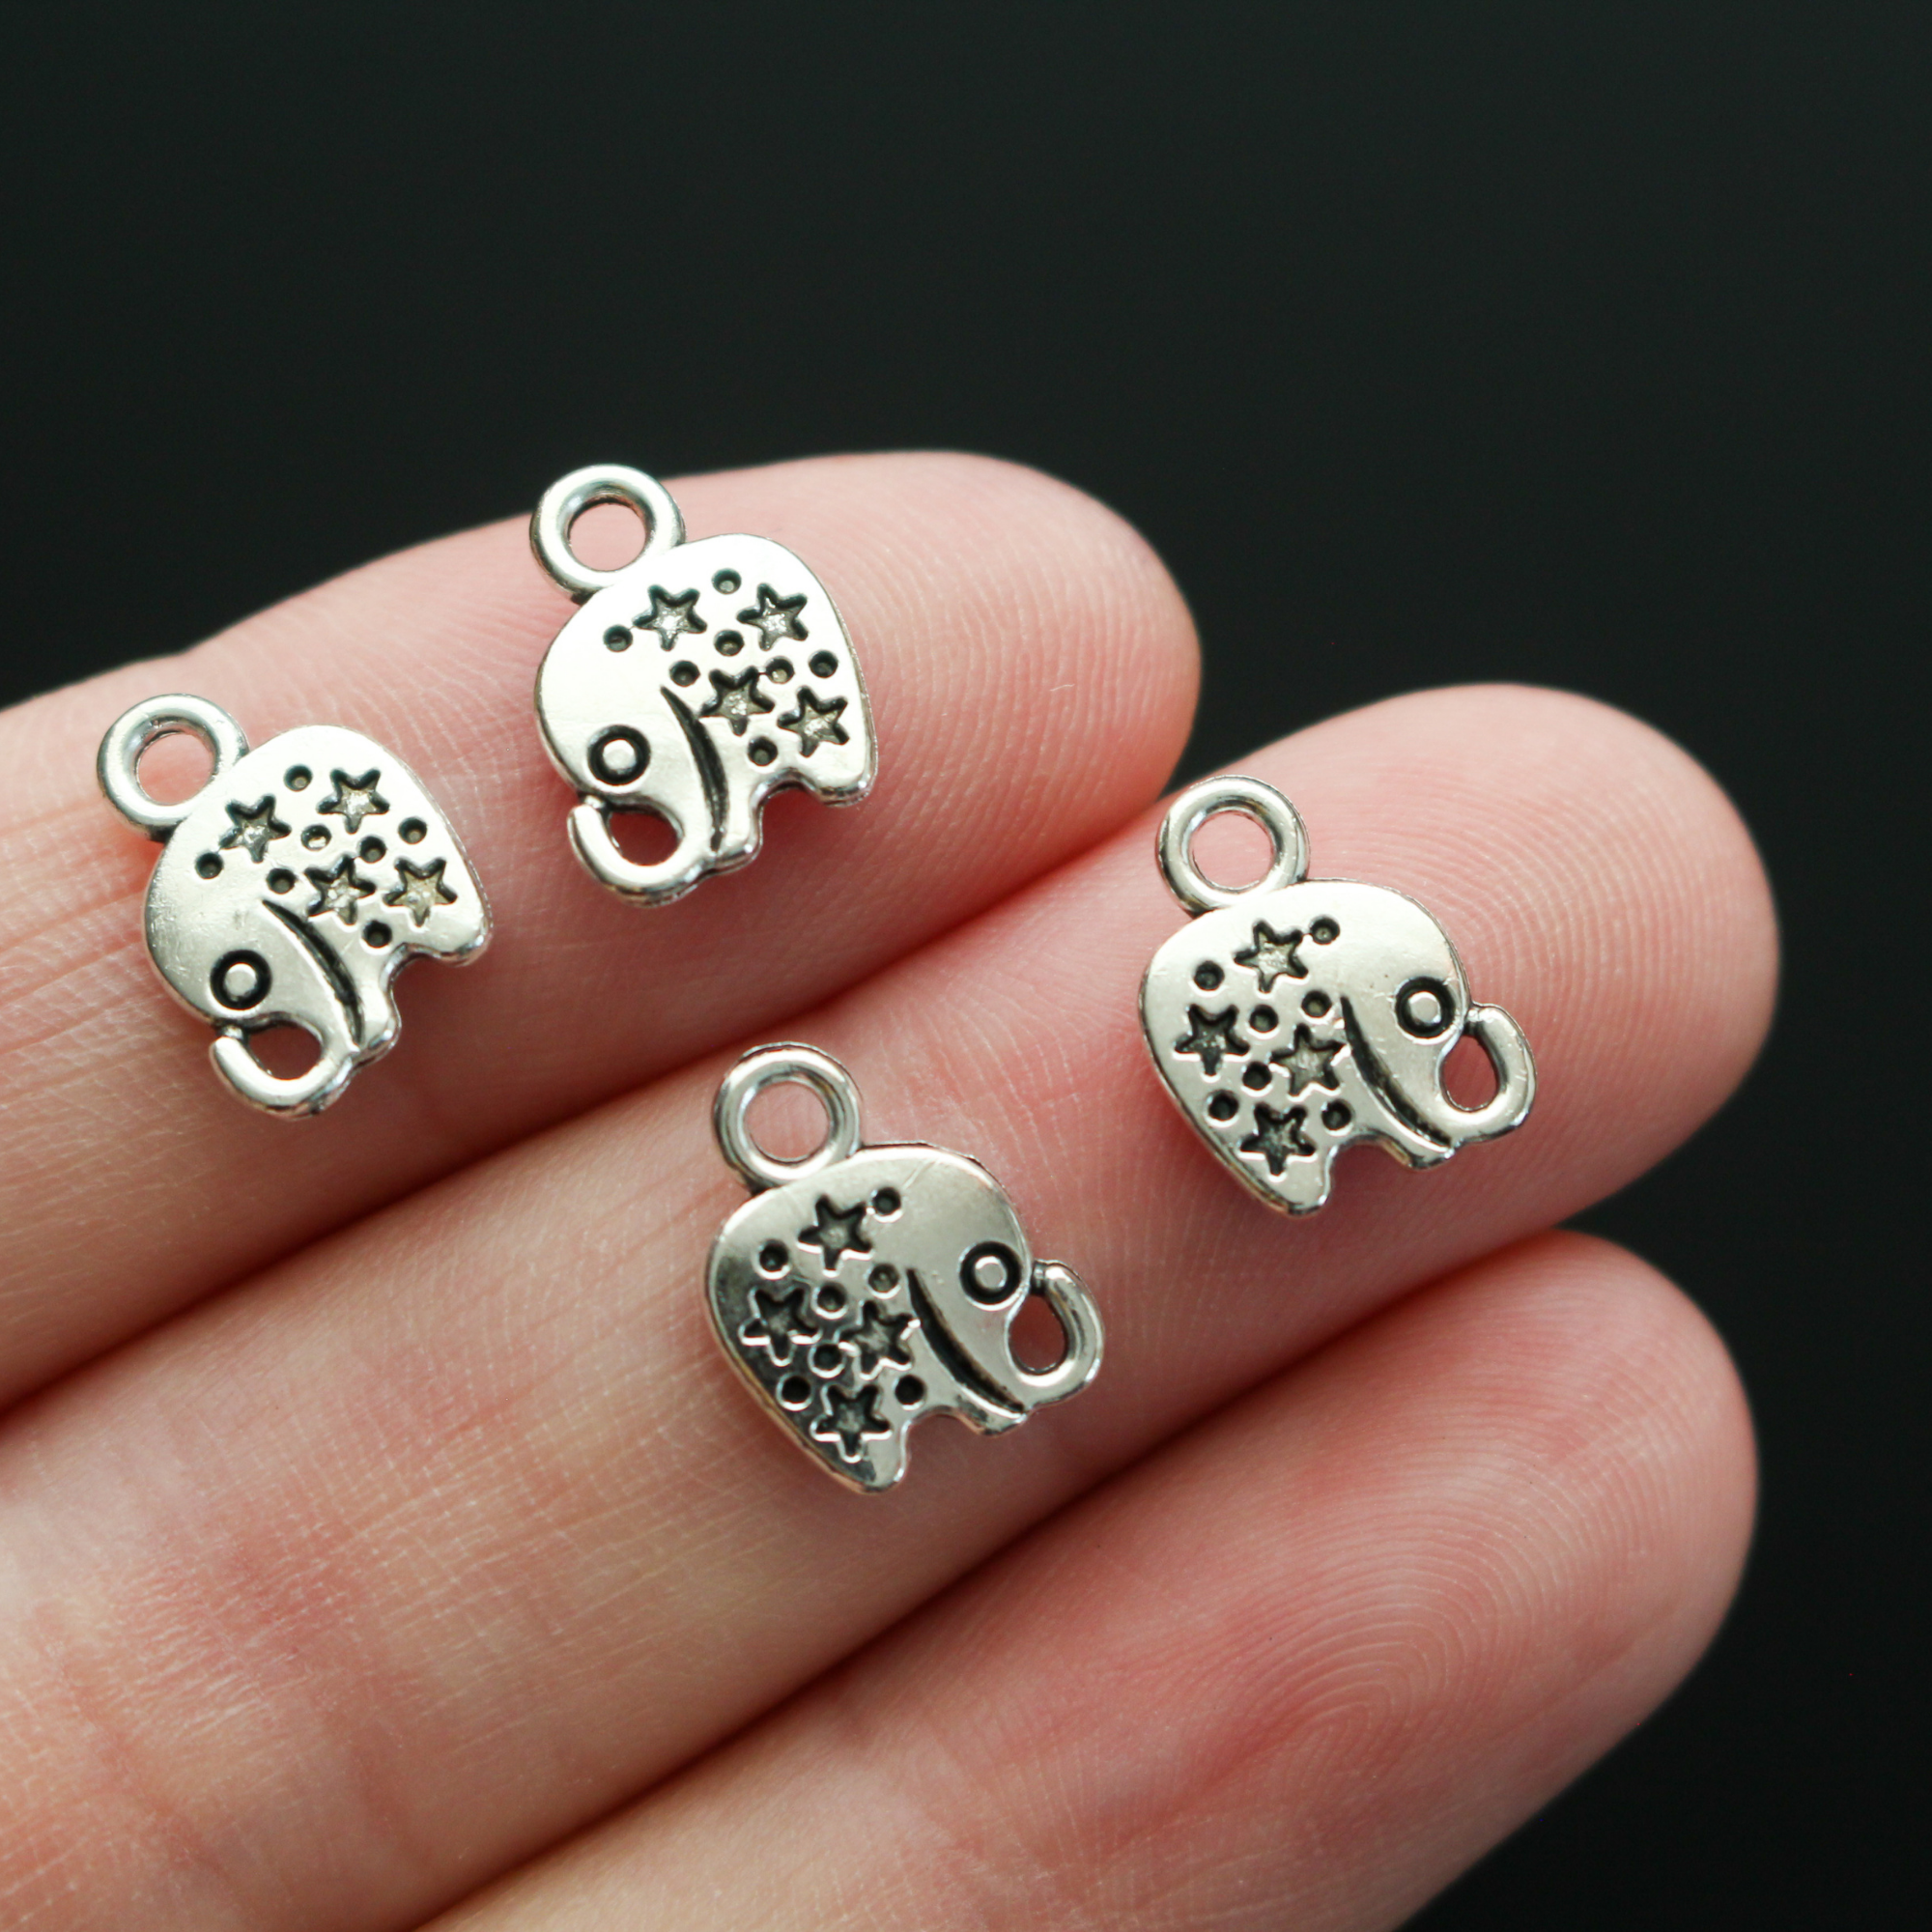 Tiny antiqued silver elephant charms with stars on the body